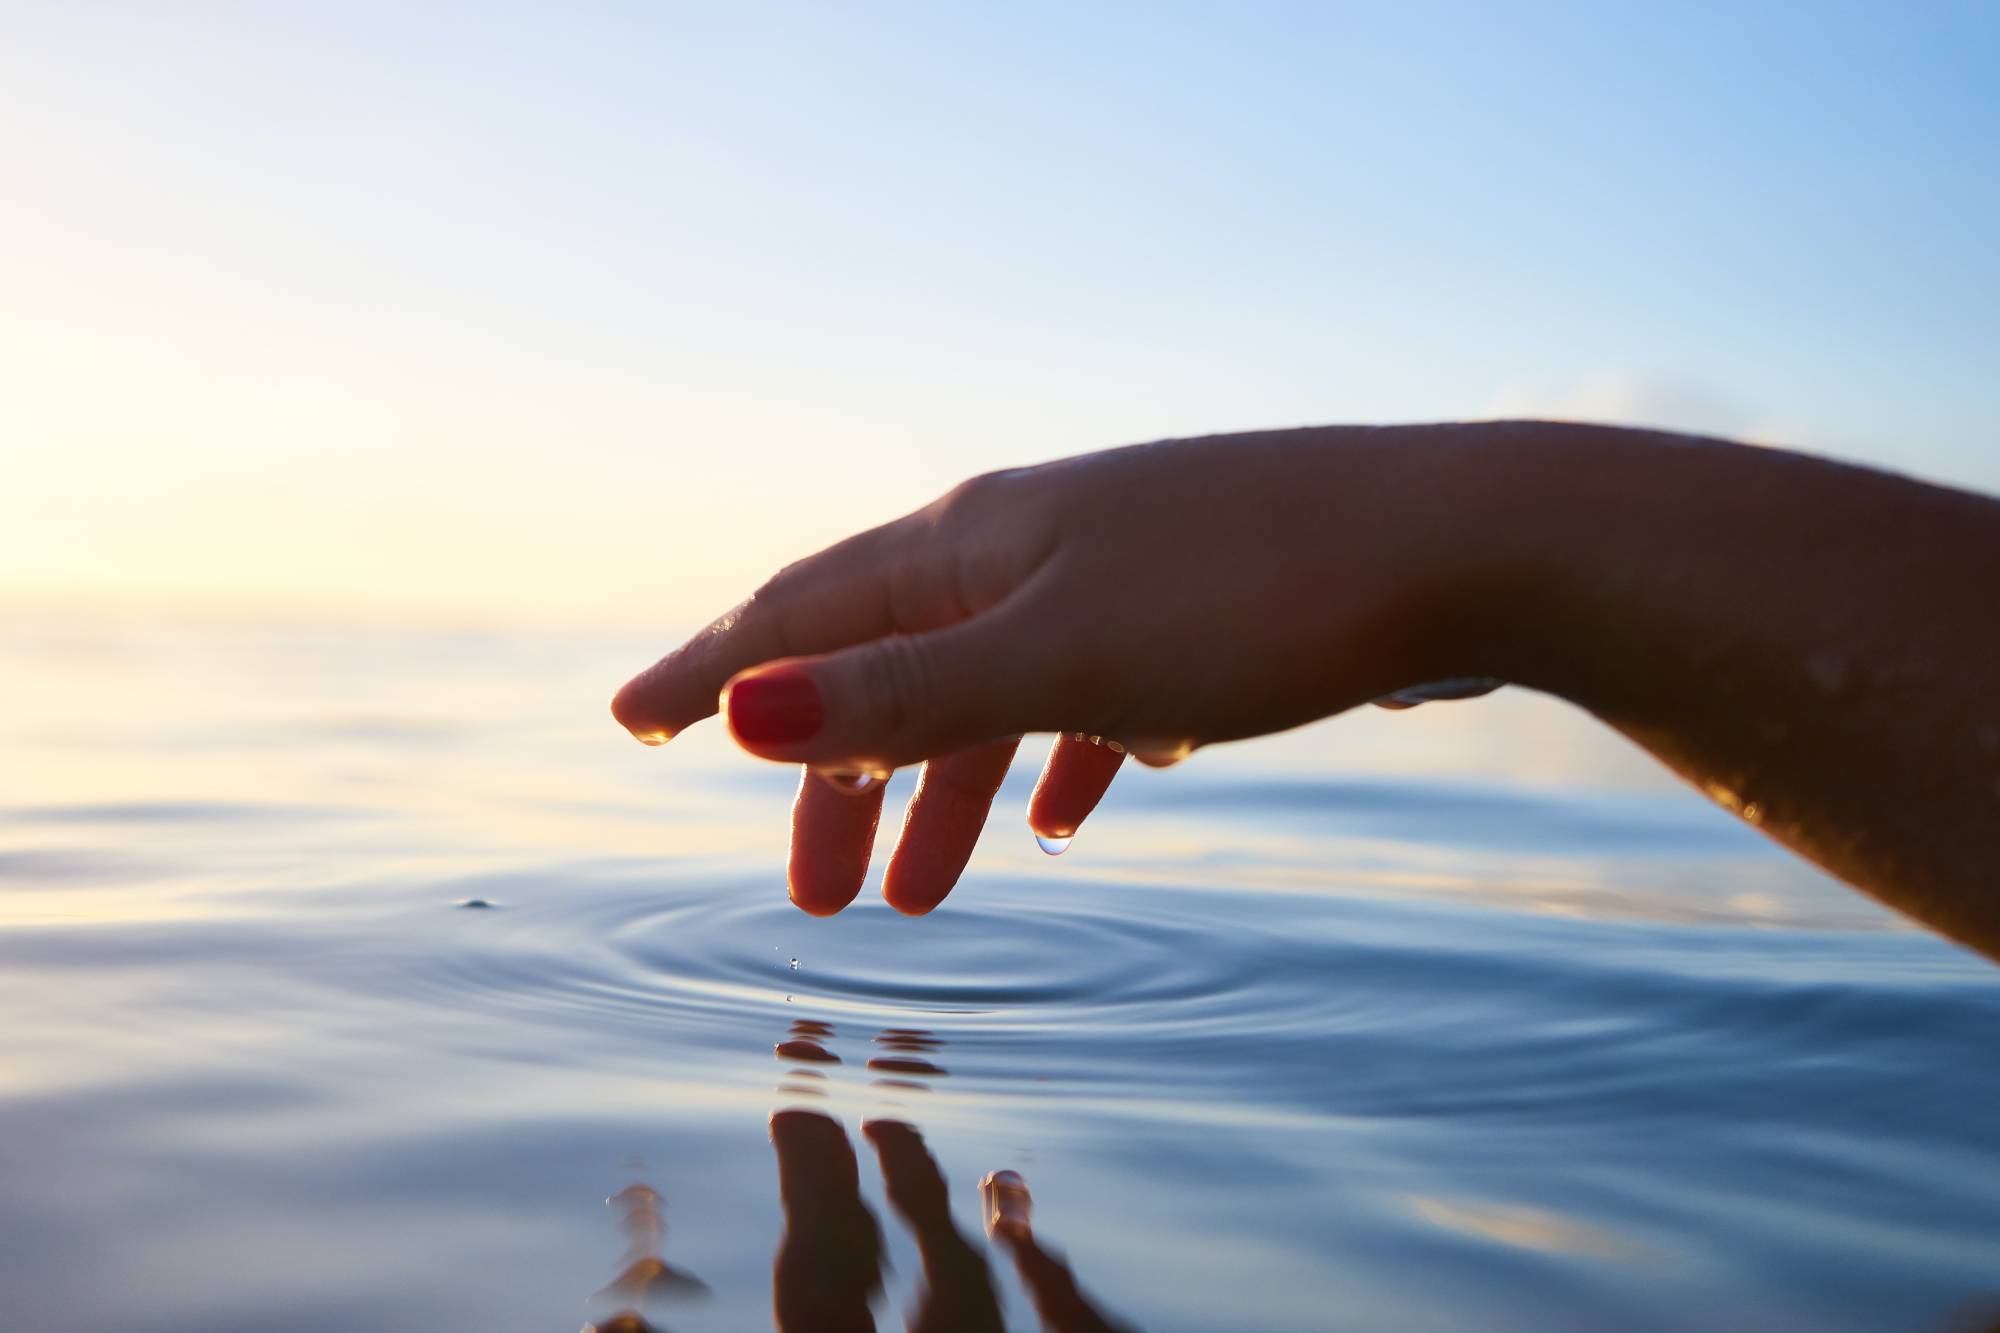 Hand touching the surface of the water. A comparison to pressing publish when writing online,